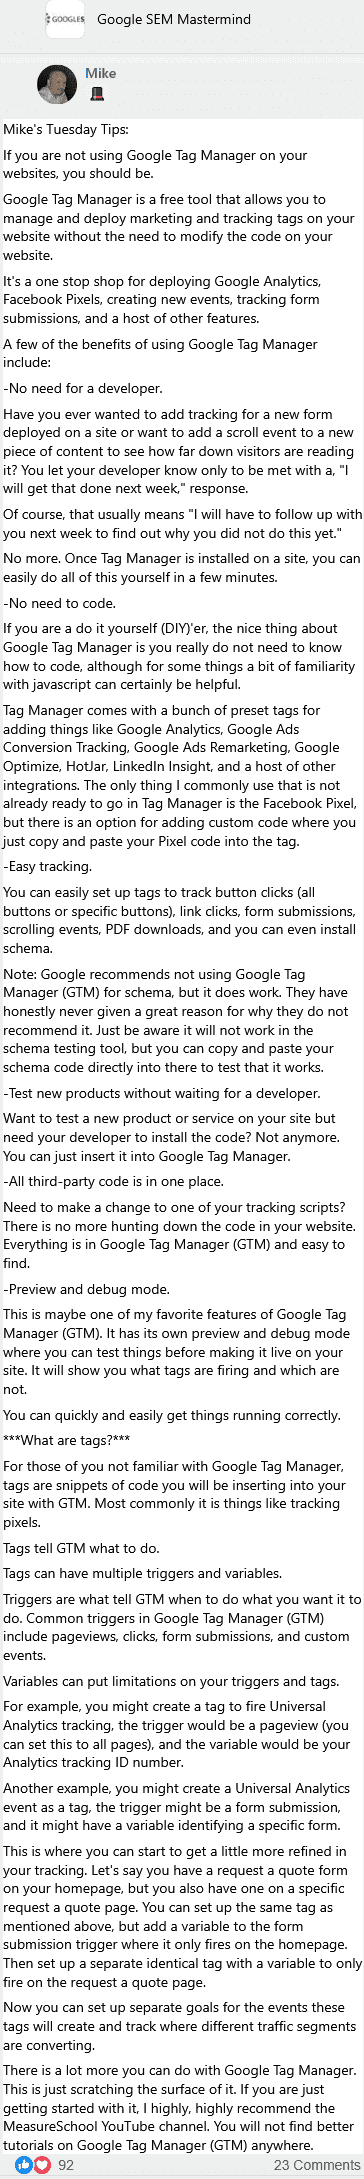 google tag manager gtm allows you to manage and deploy marketing and tracking tags on your website without the need to modify the code on your website